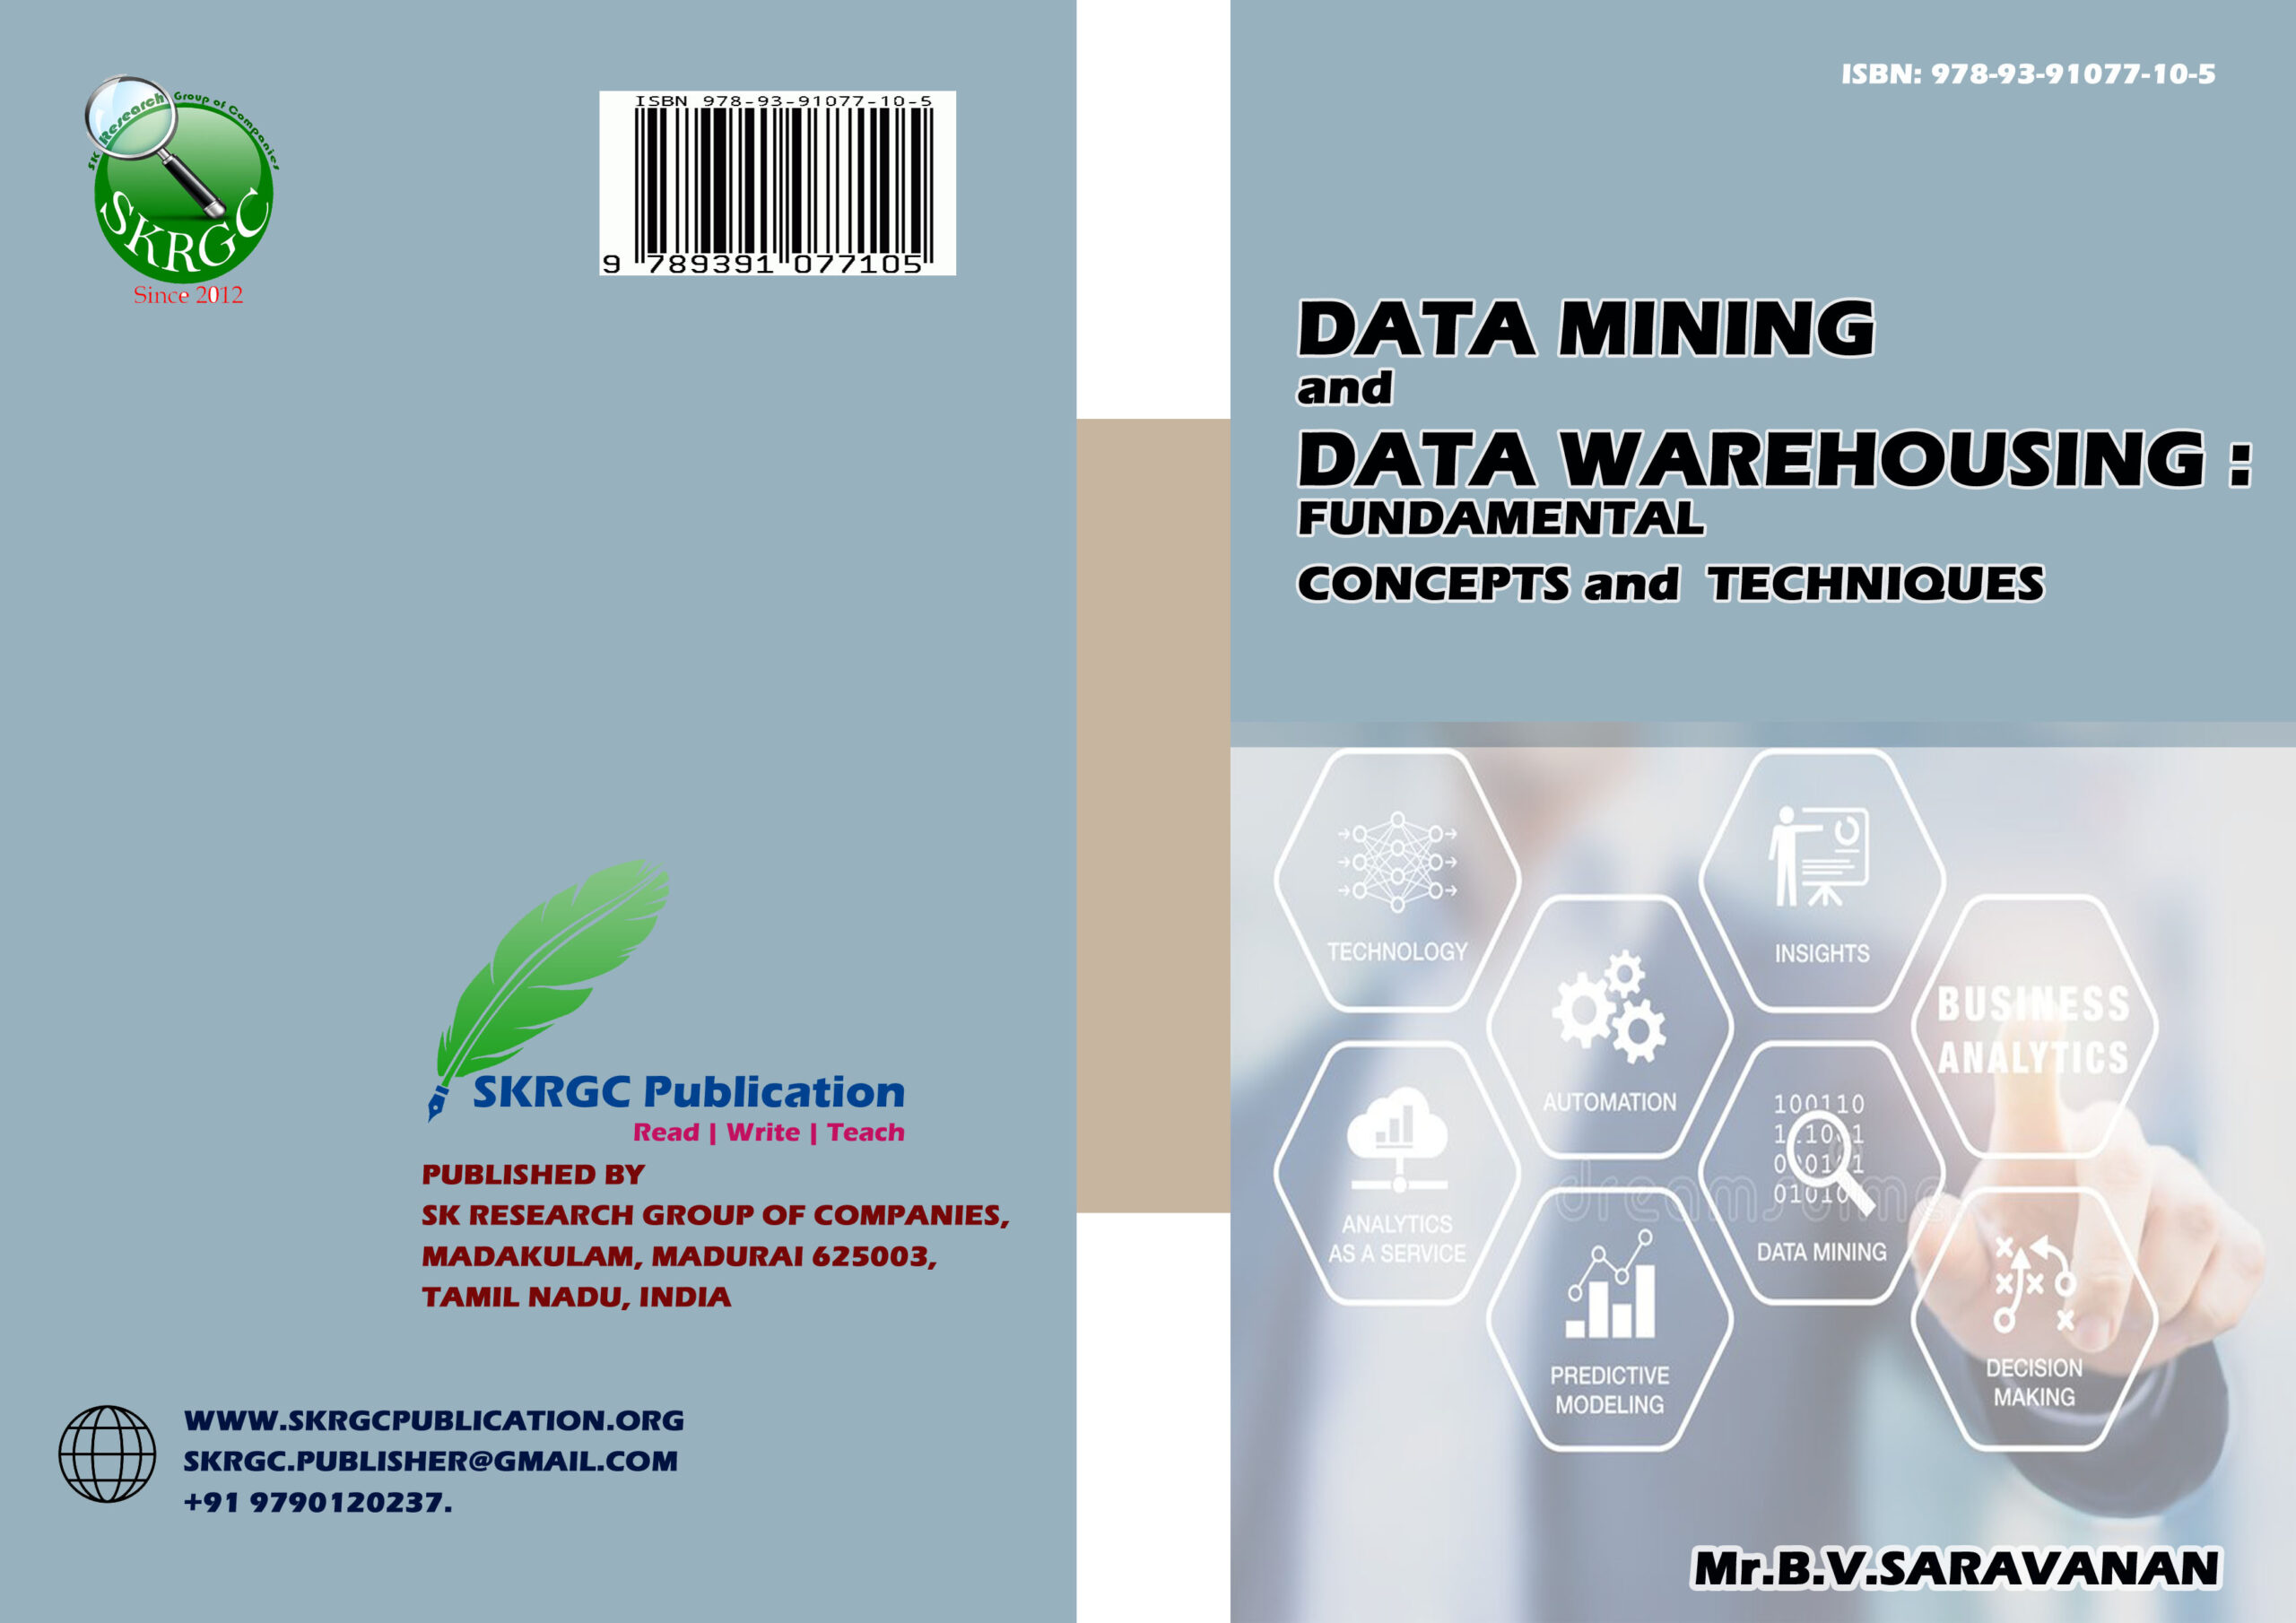 Data Mining and Data Warehousing : Fundamental Concepts and Techniques